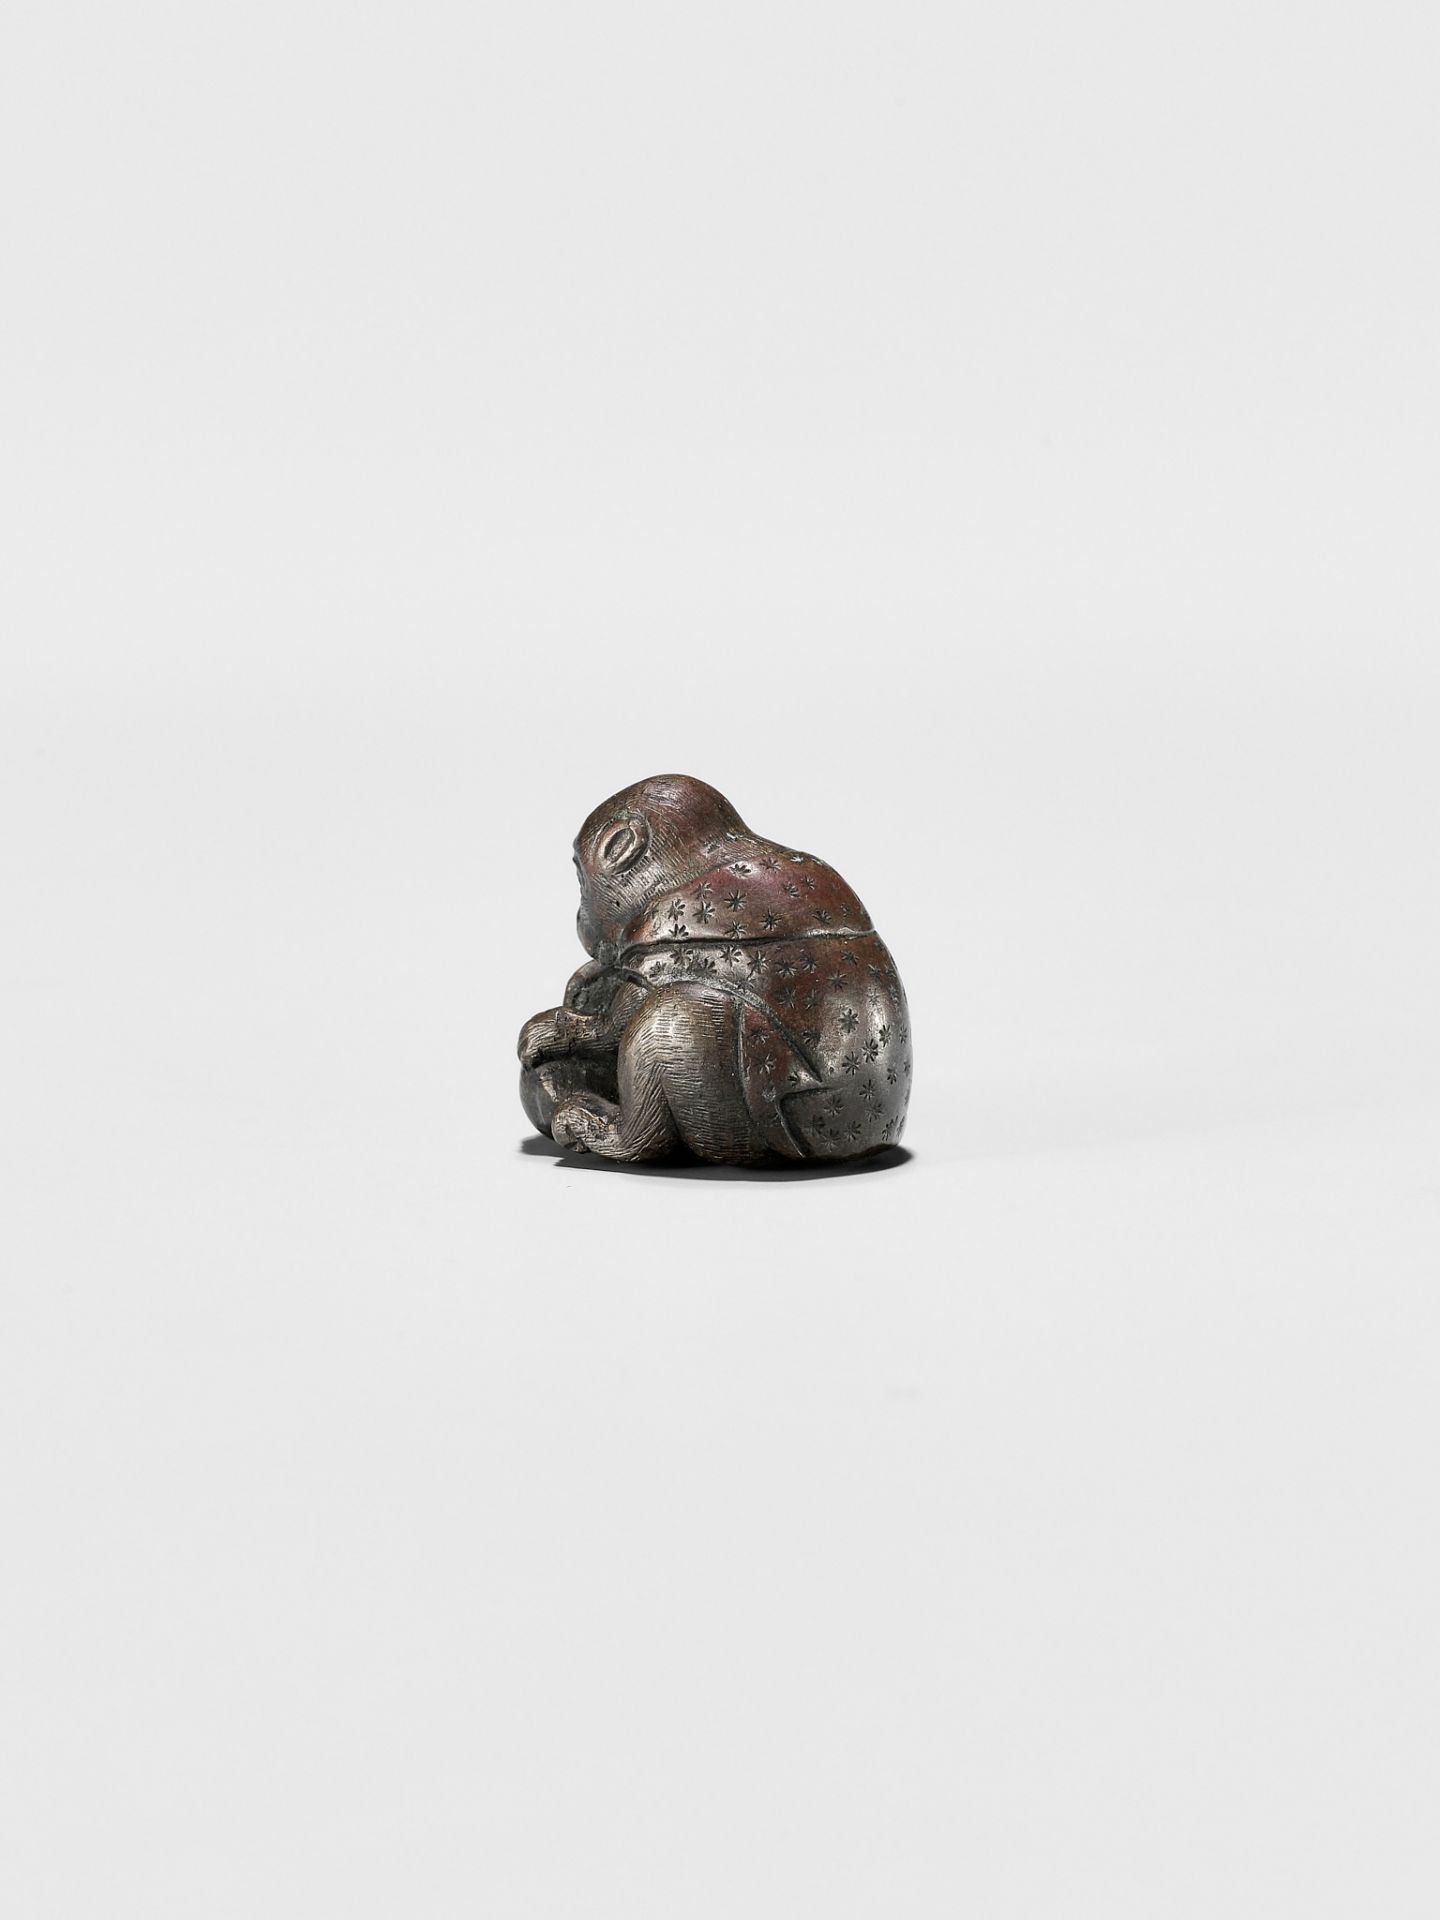 A RARE BRONZE NETSUKE OF A MONKEY WITH GOURD - Image 4 of 9